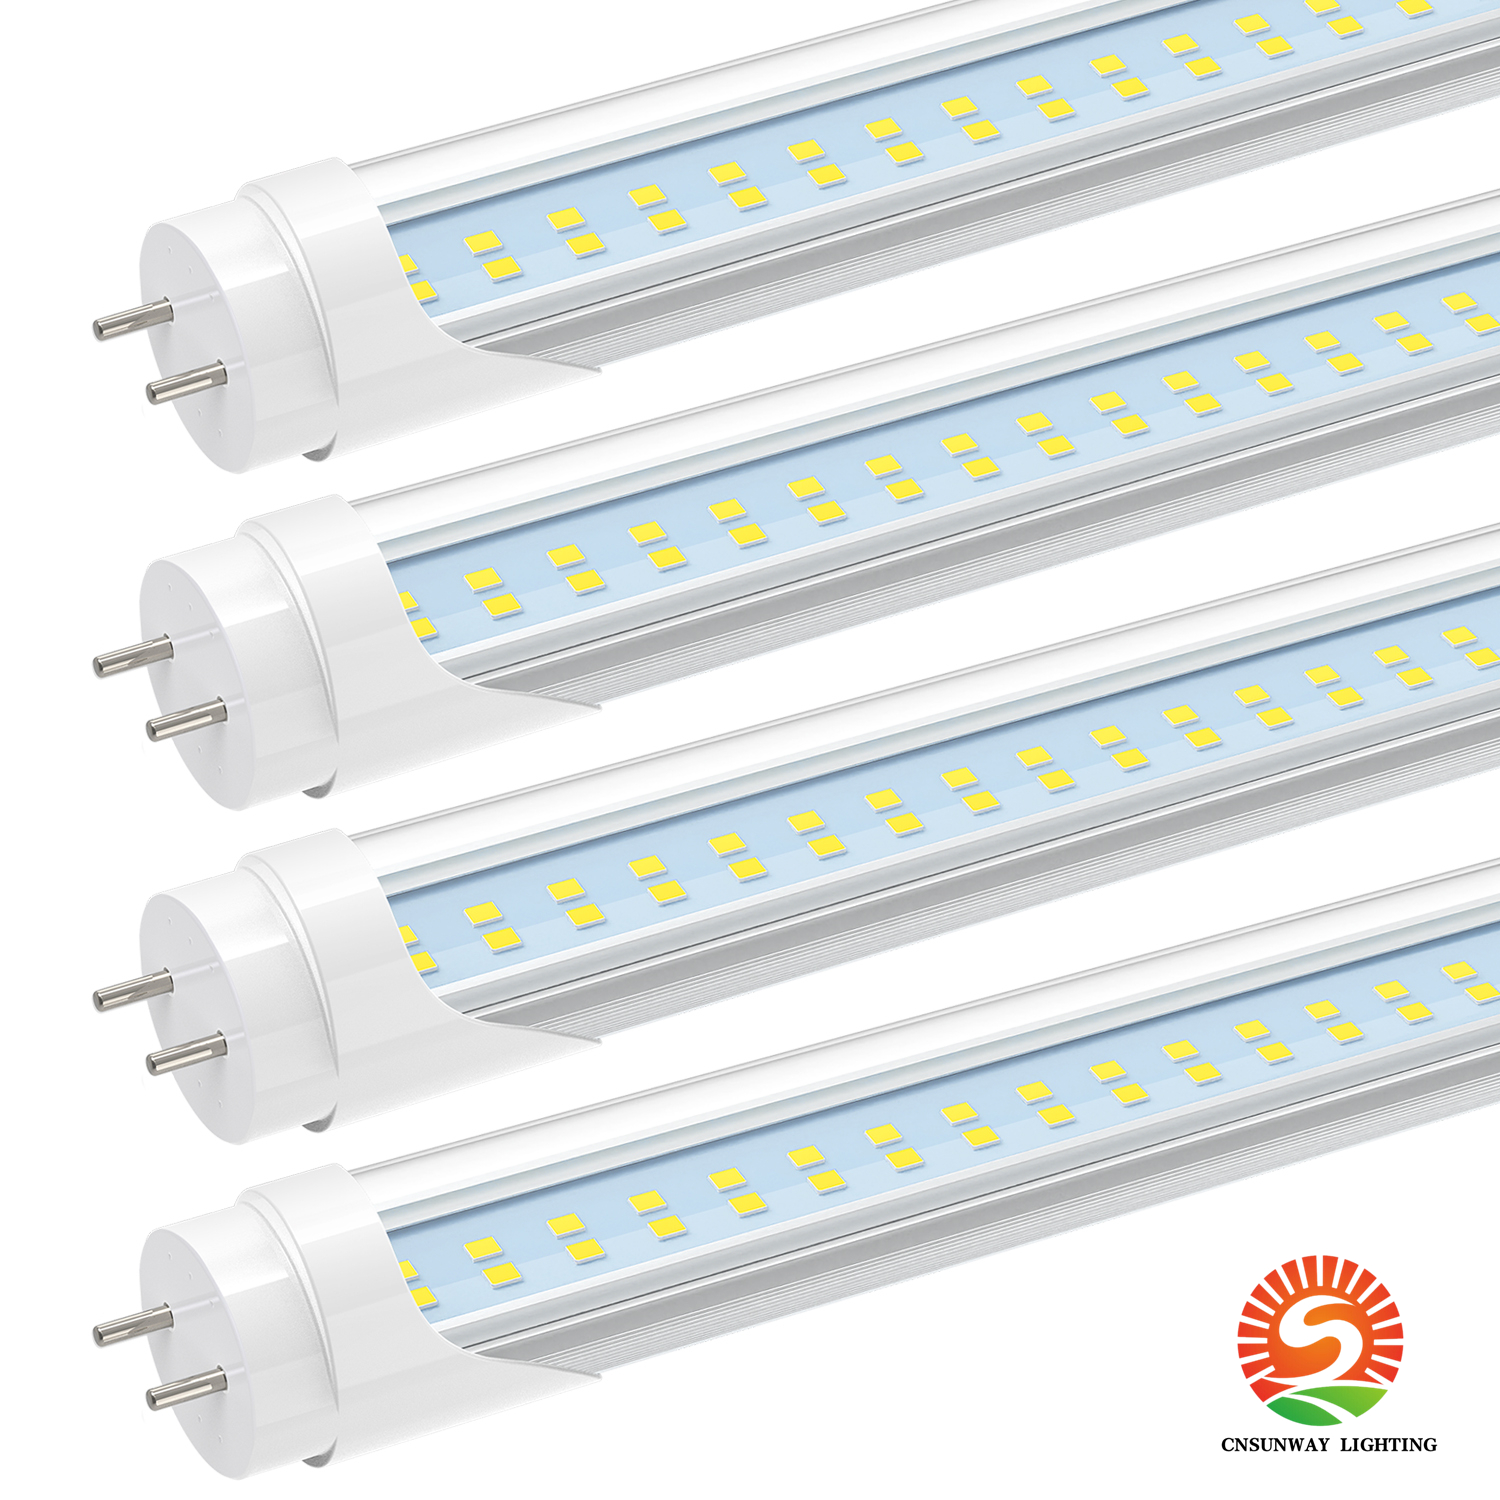 T8 LED Type B Tube Light 3FT, 2520LM, 18W(45W Equivalent), 6000K, 36 Inch F30T12 Fluorescent Bulb Replacement, Dual Ended Power, ETL Listed, Remove Ballast Lighting Fixture